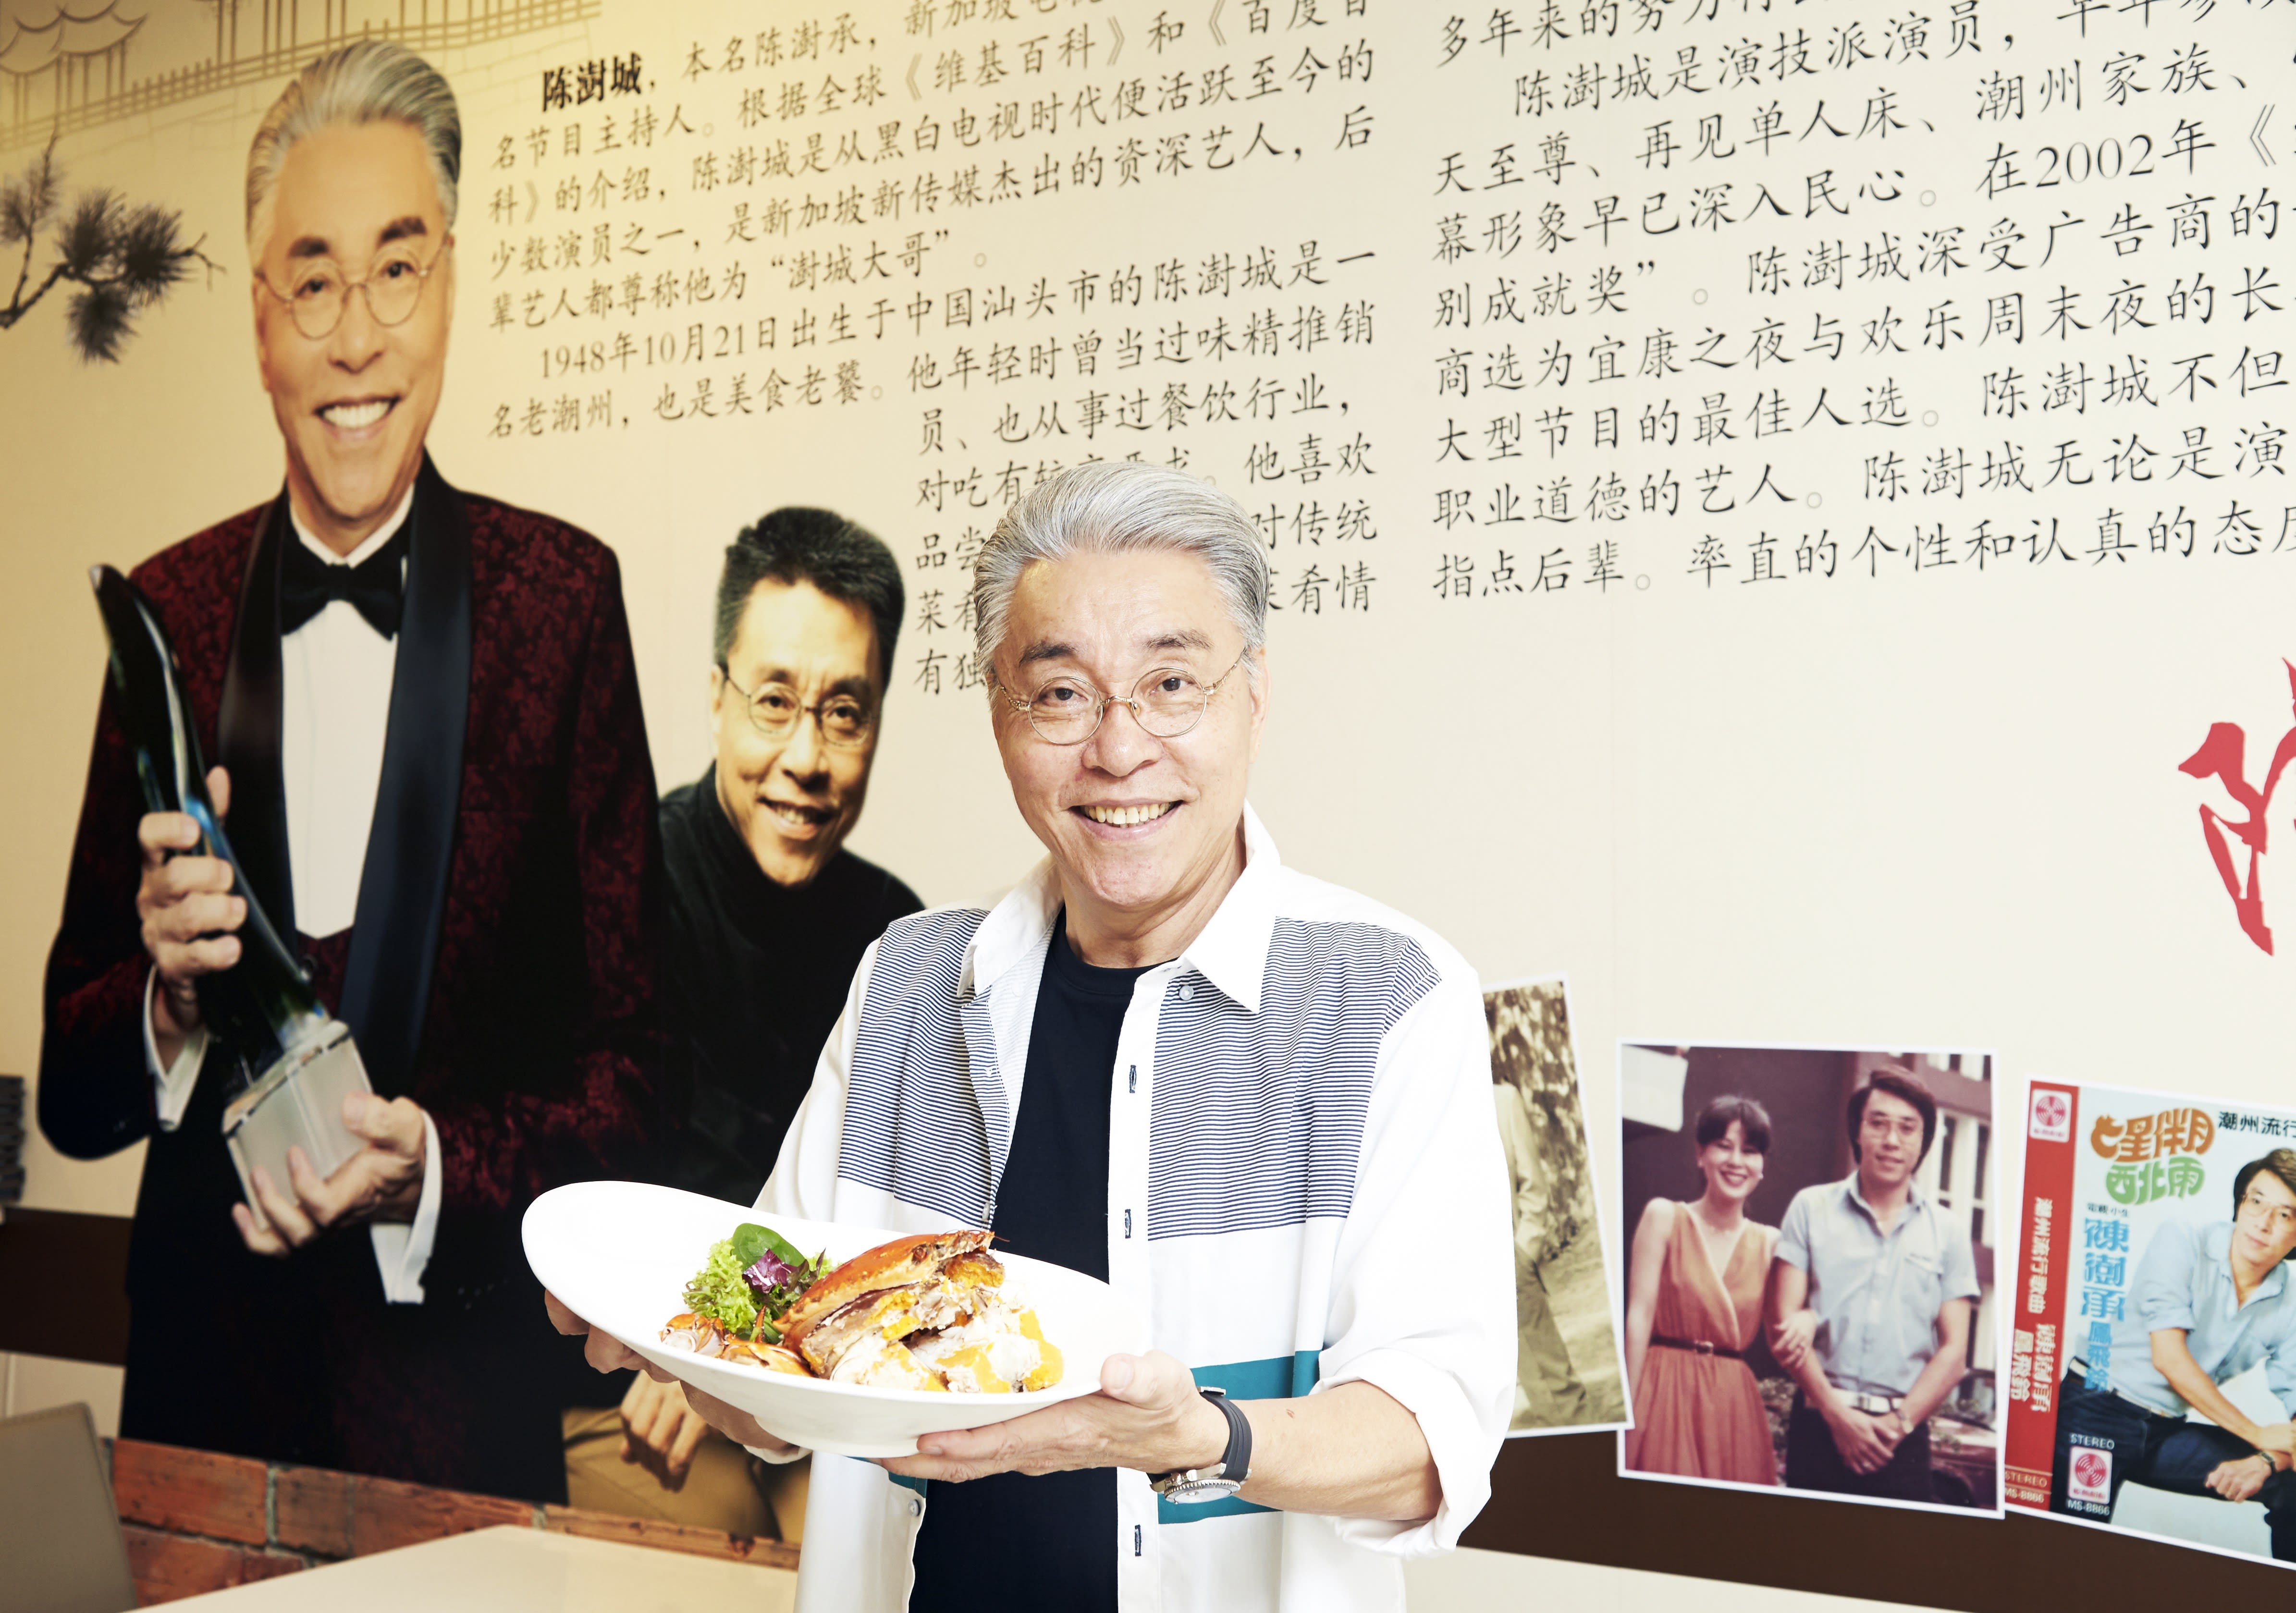 Chen Shucheng Shuts Teochew Eatery Due To Covid-19: "I Can Sleep Better At Night Now"